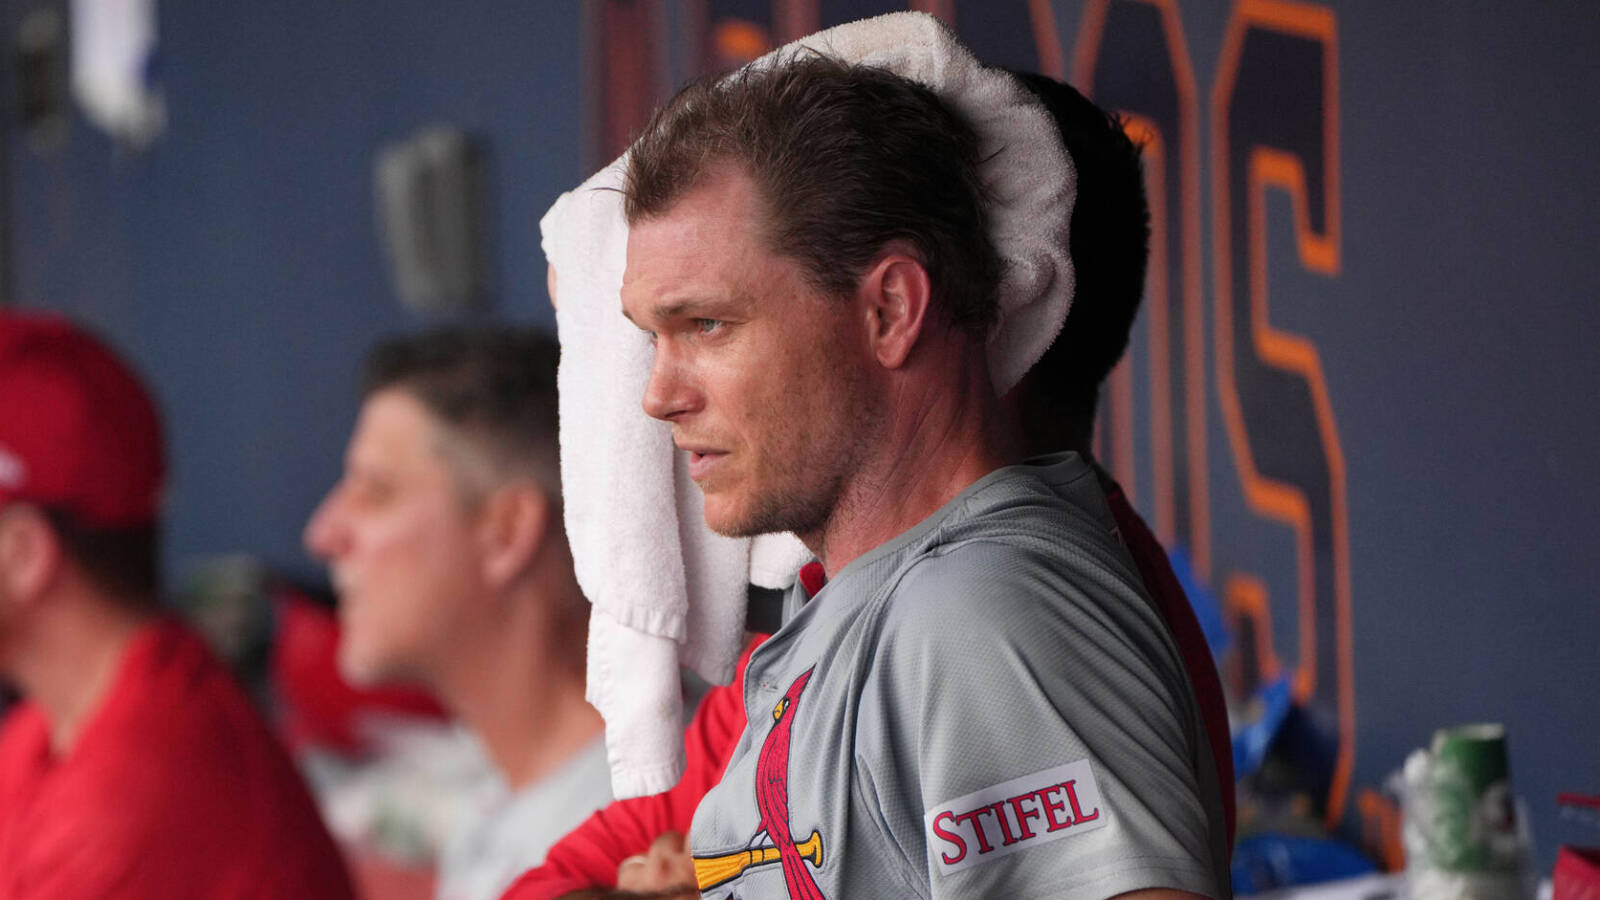 Cardinals already facing injury attrition in rotation and outfield